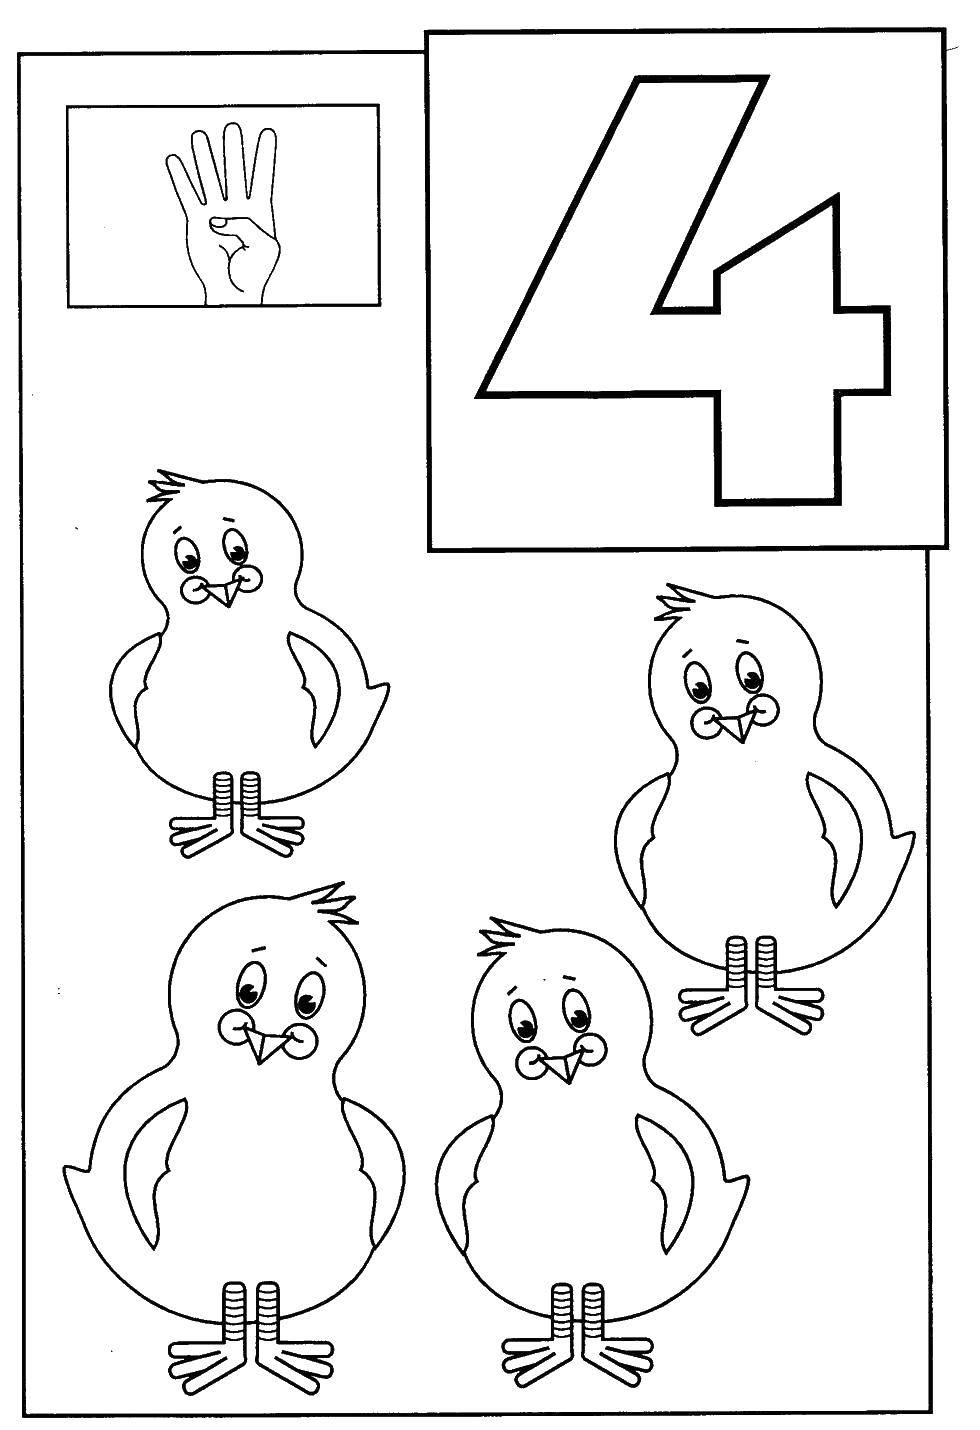 Coloring 4 chicken. Category Numbers. Tags:  figures 4, chickens.